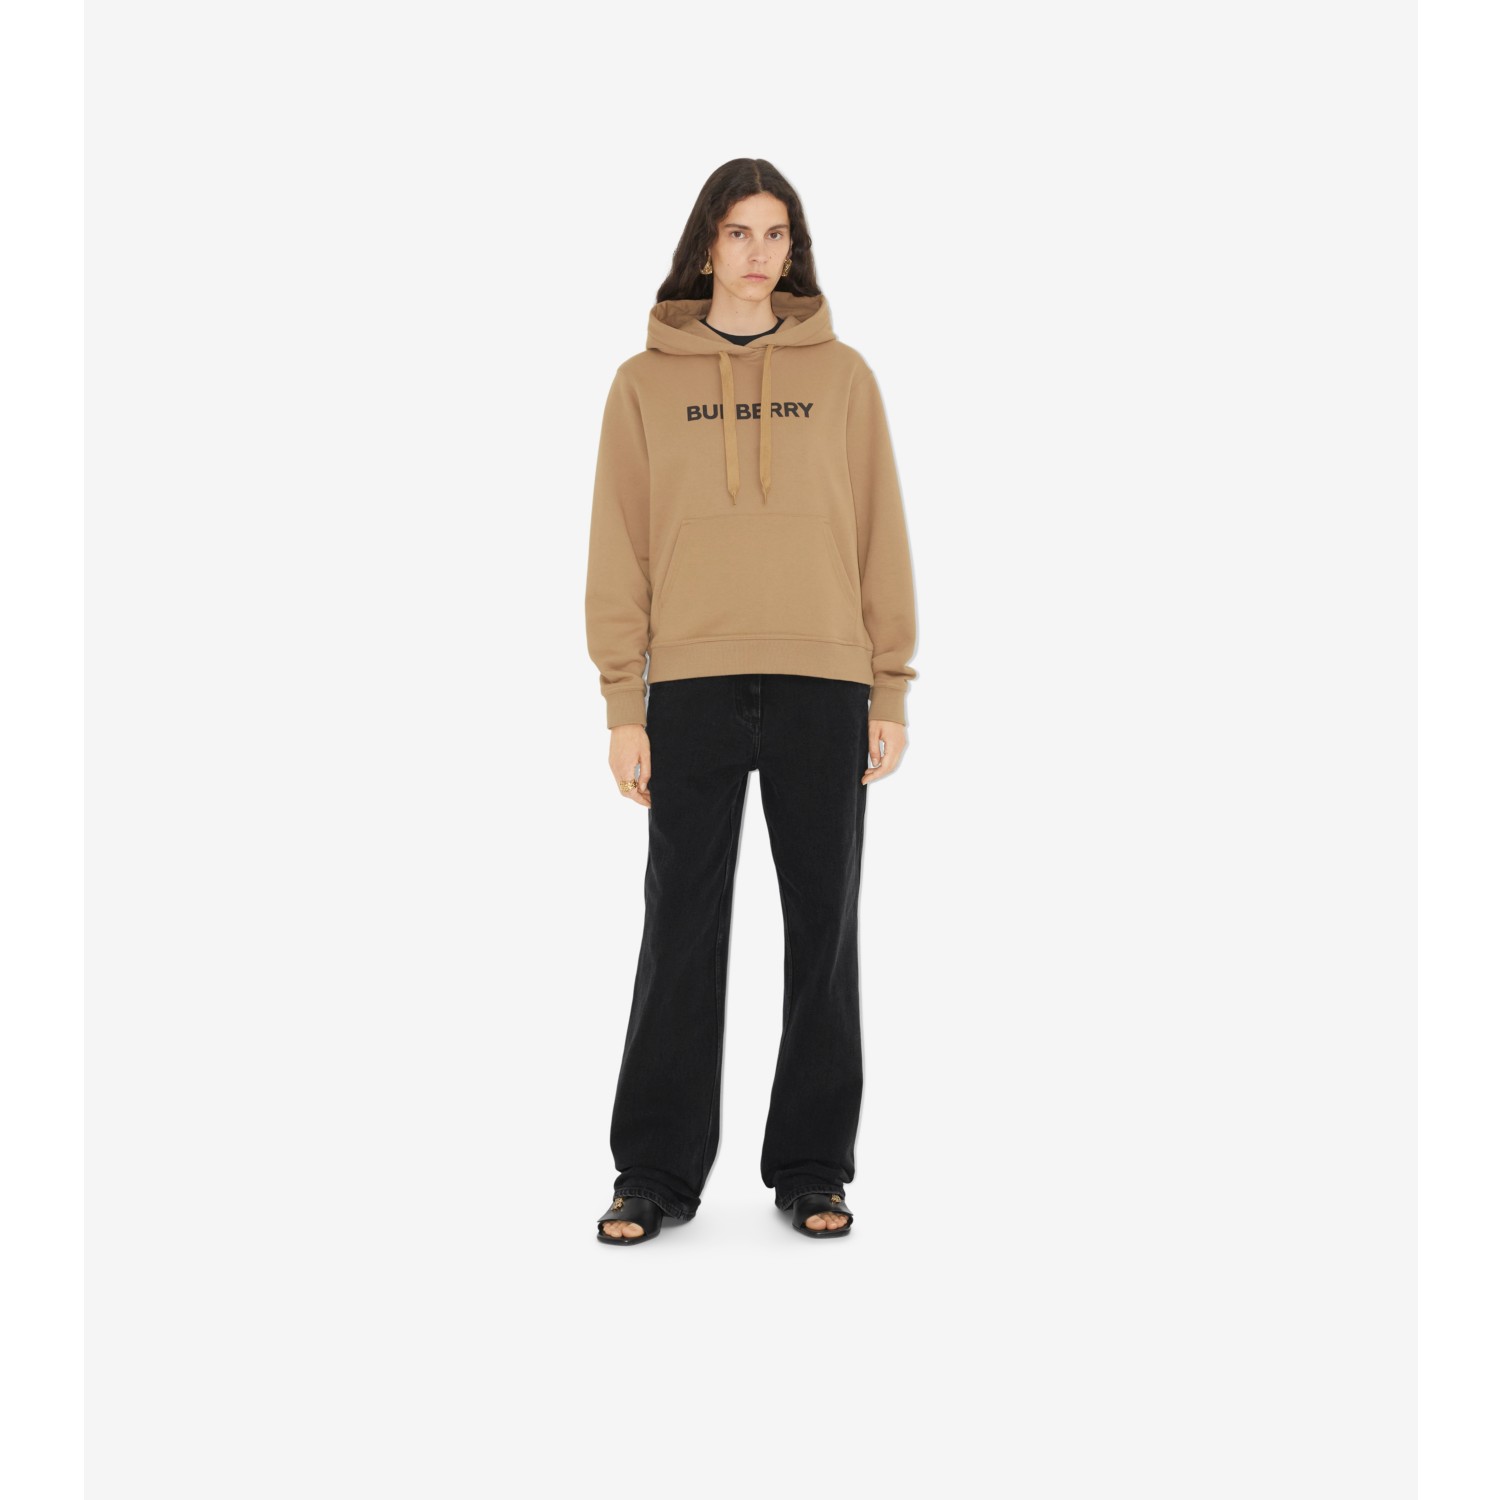 BURBERRY CARLA HOODIE Camel Embroidered Logo Cape New $599.00 - PicClick